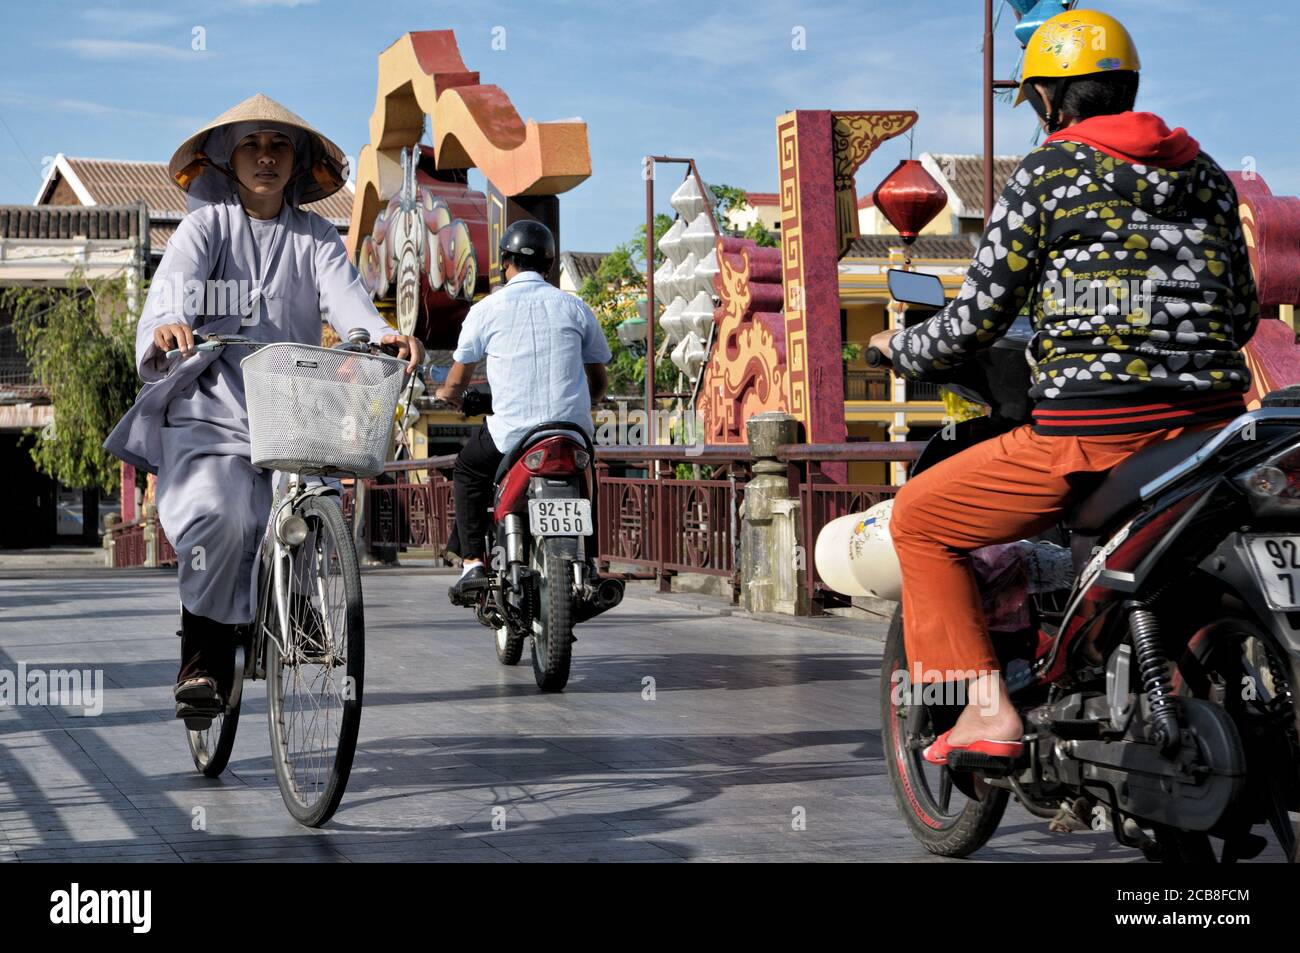 Bicycle and motorcycles on a bridge in Hoi An (Bridge of Lights), Vietnam Stock Photo